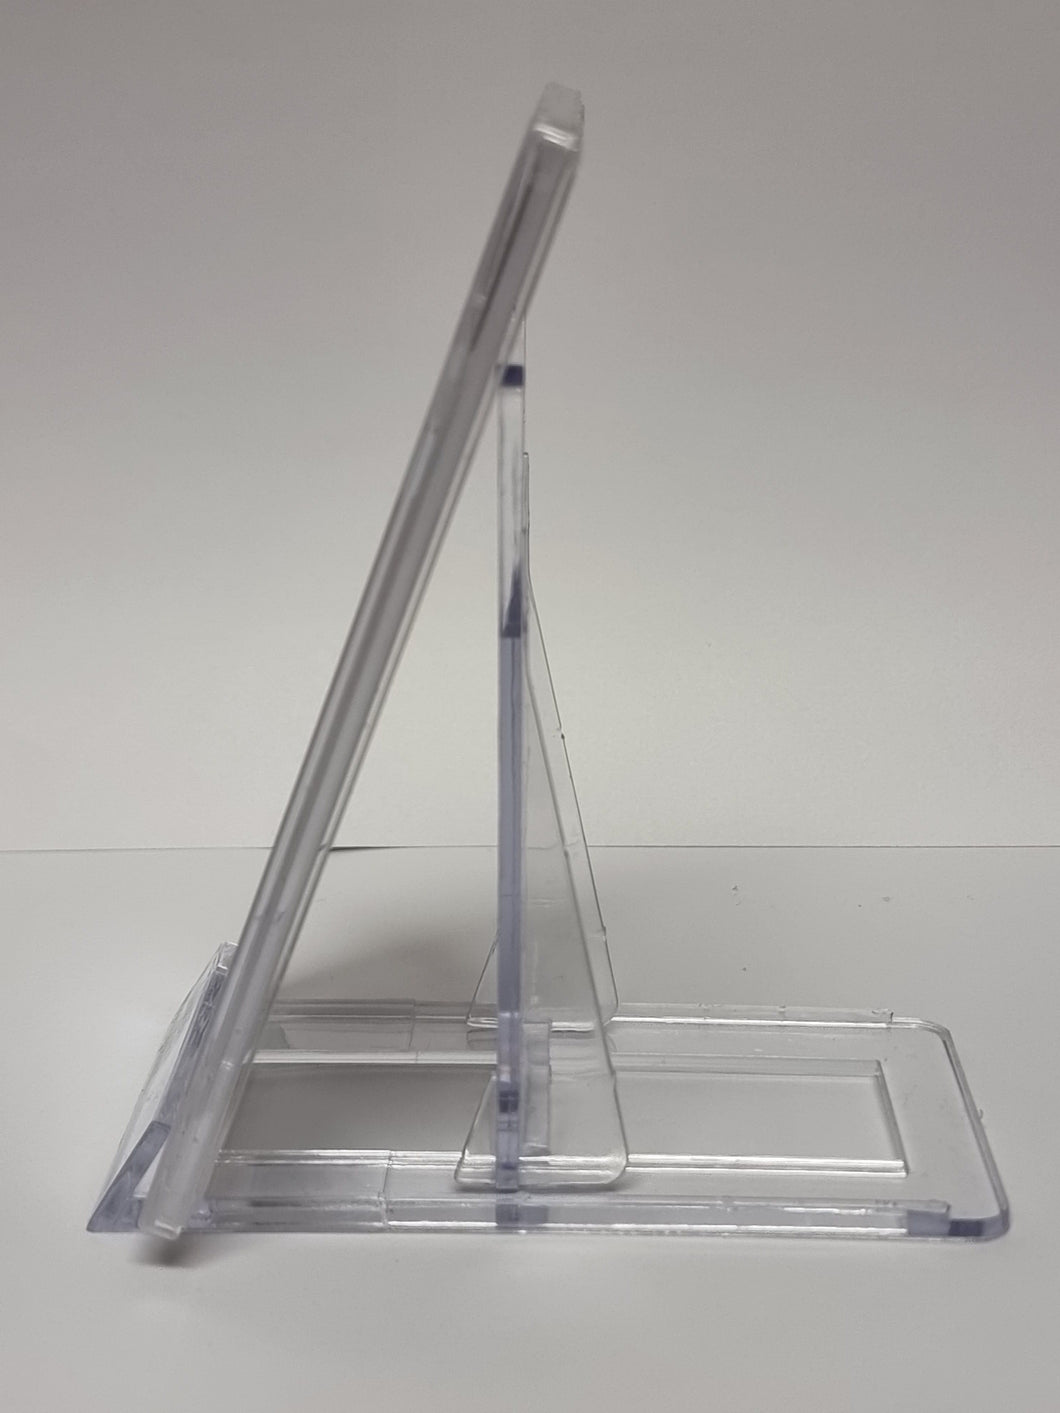 Acrylic Display Stand for Trading Card Grading, Pokemon card grading, uk grading company, graded pokemon cards, graded cards, Best UK grading company, best UK card grading company, Pokemon card grading near me, where to get cards graded, Pokemon card grading, how to get Pokemon cards graded, grading Pokemon cards, graded Pokemon cards, how to grade Pokemon cards, how to get a Pokemon card graded, trading card grading uk, card grading uk,